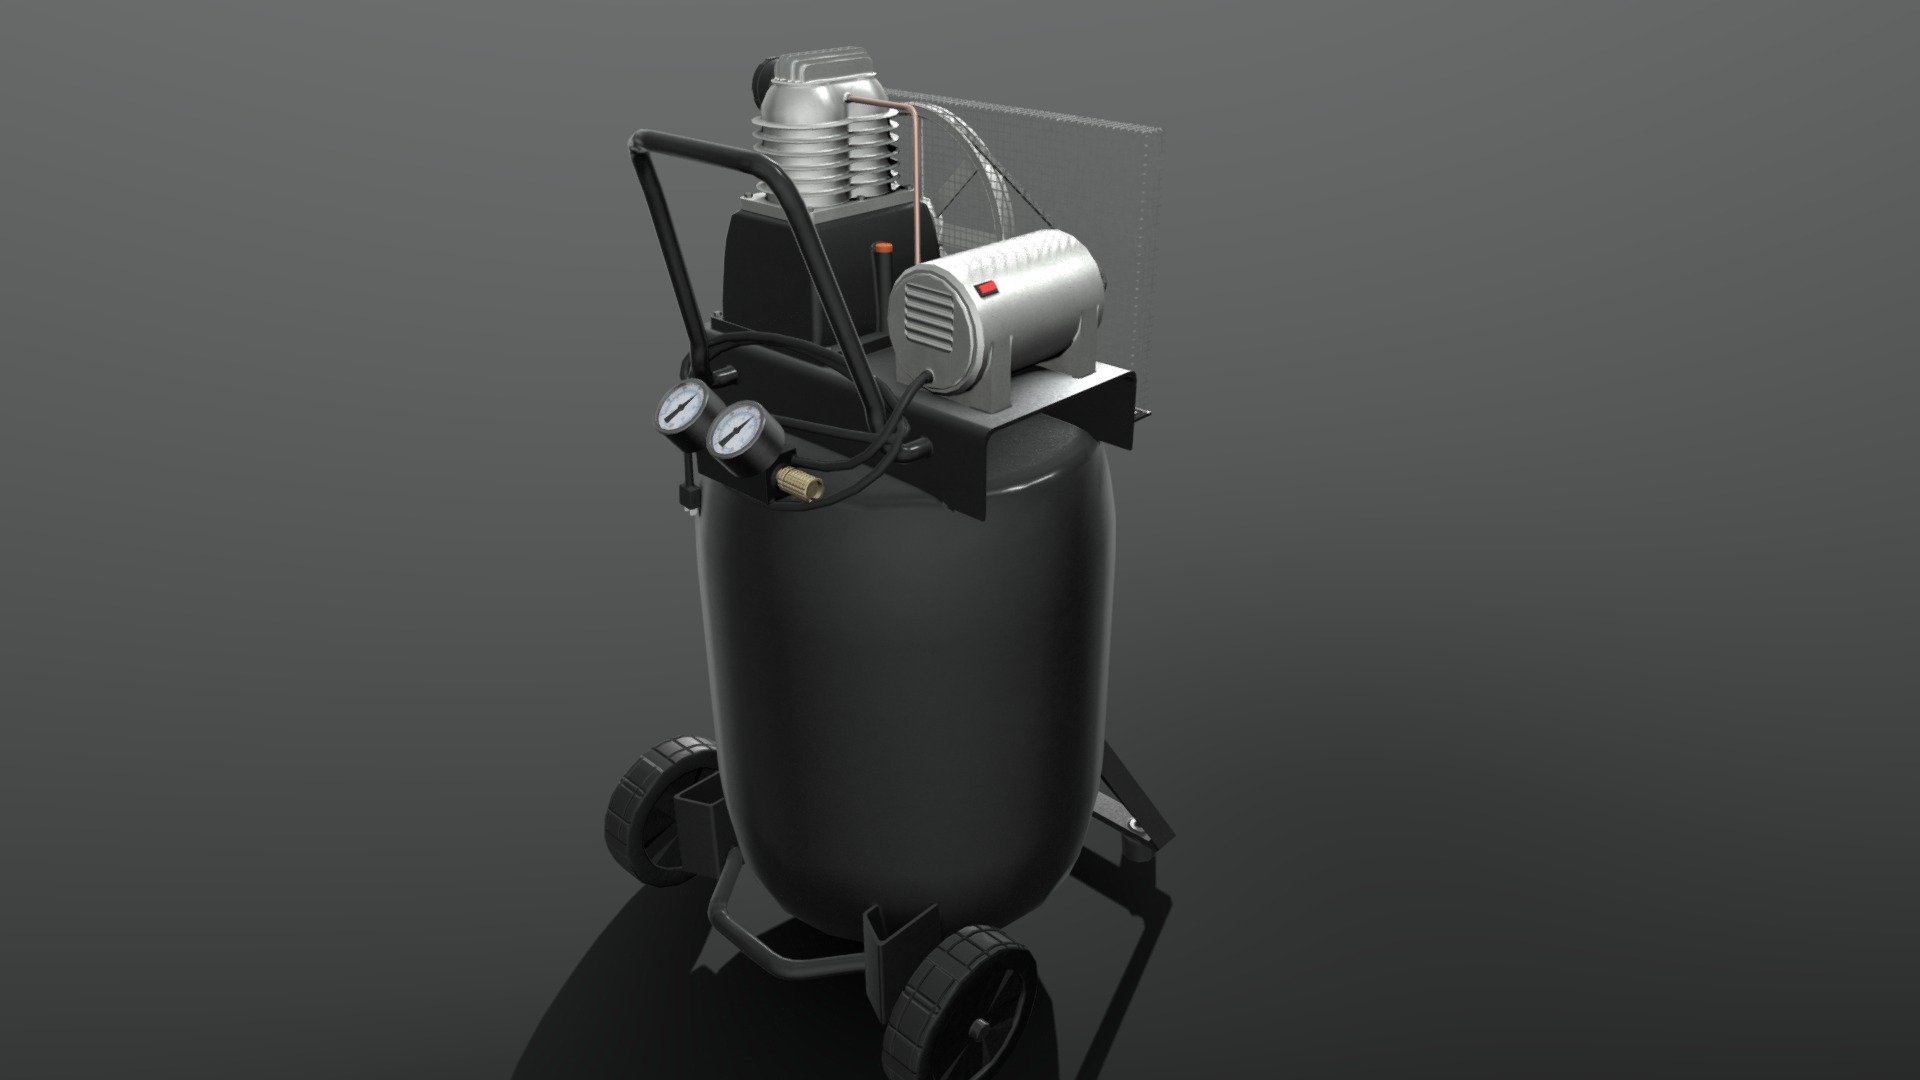 Here is a AC Compressor. I like modeling everyday tools. Did this after a Central Penumatic one I have 3d model